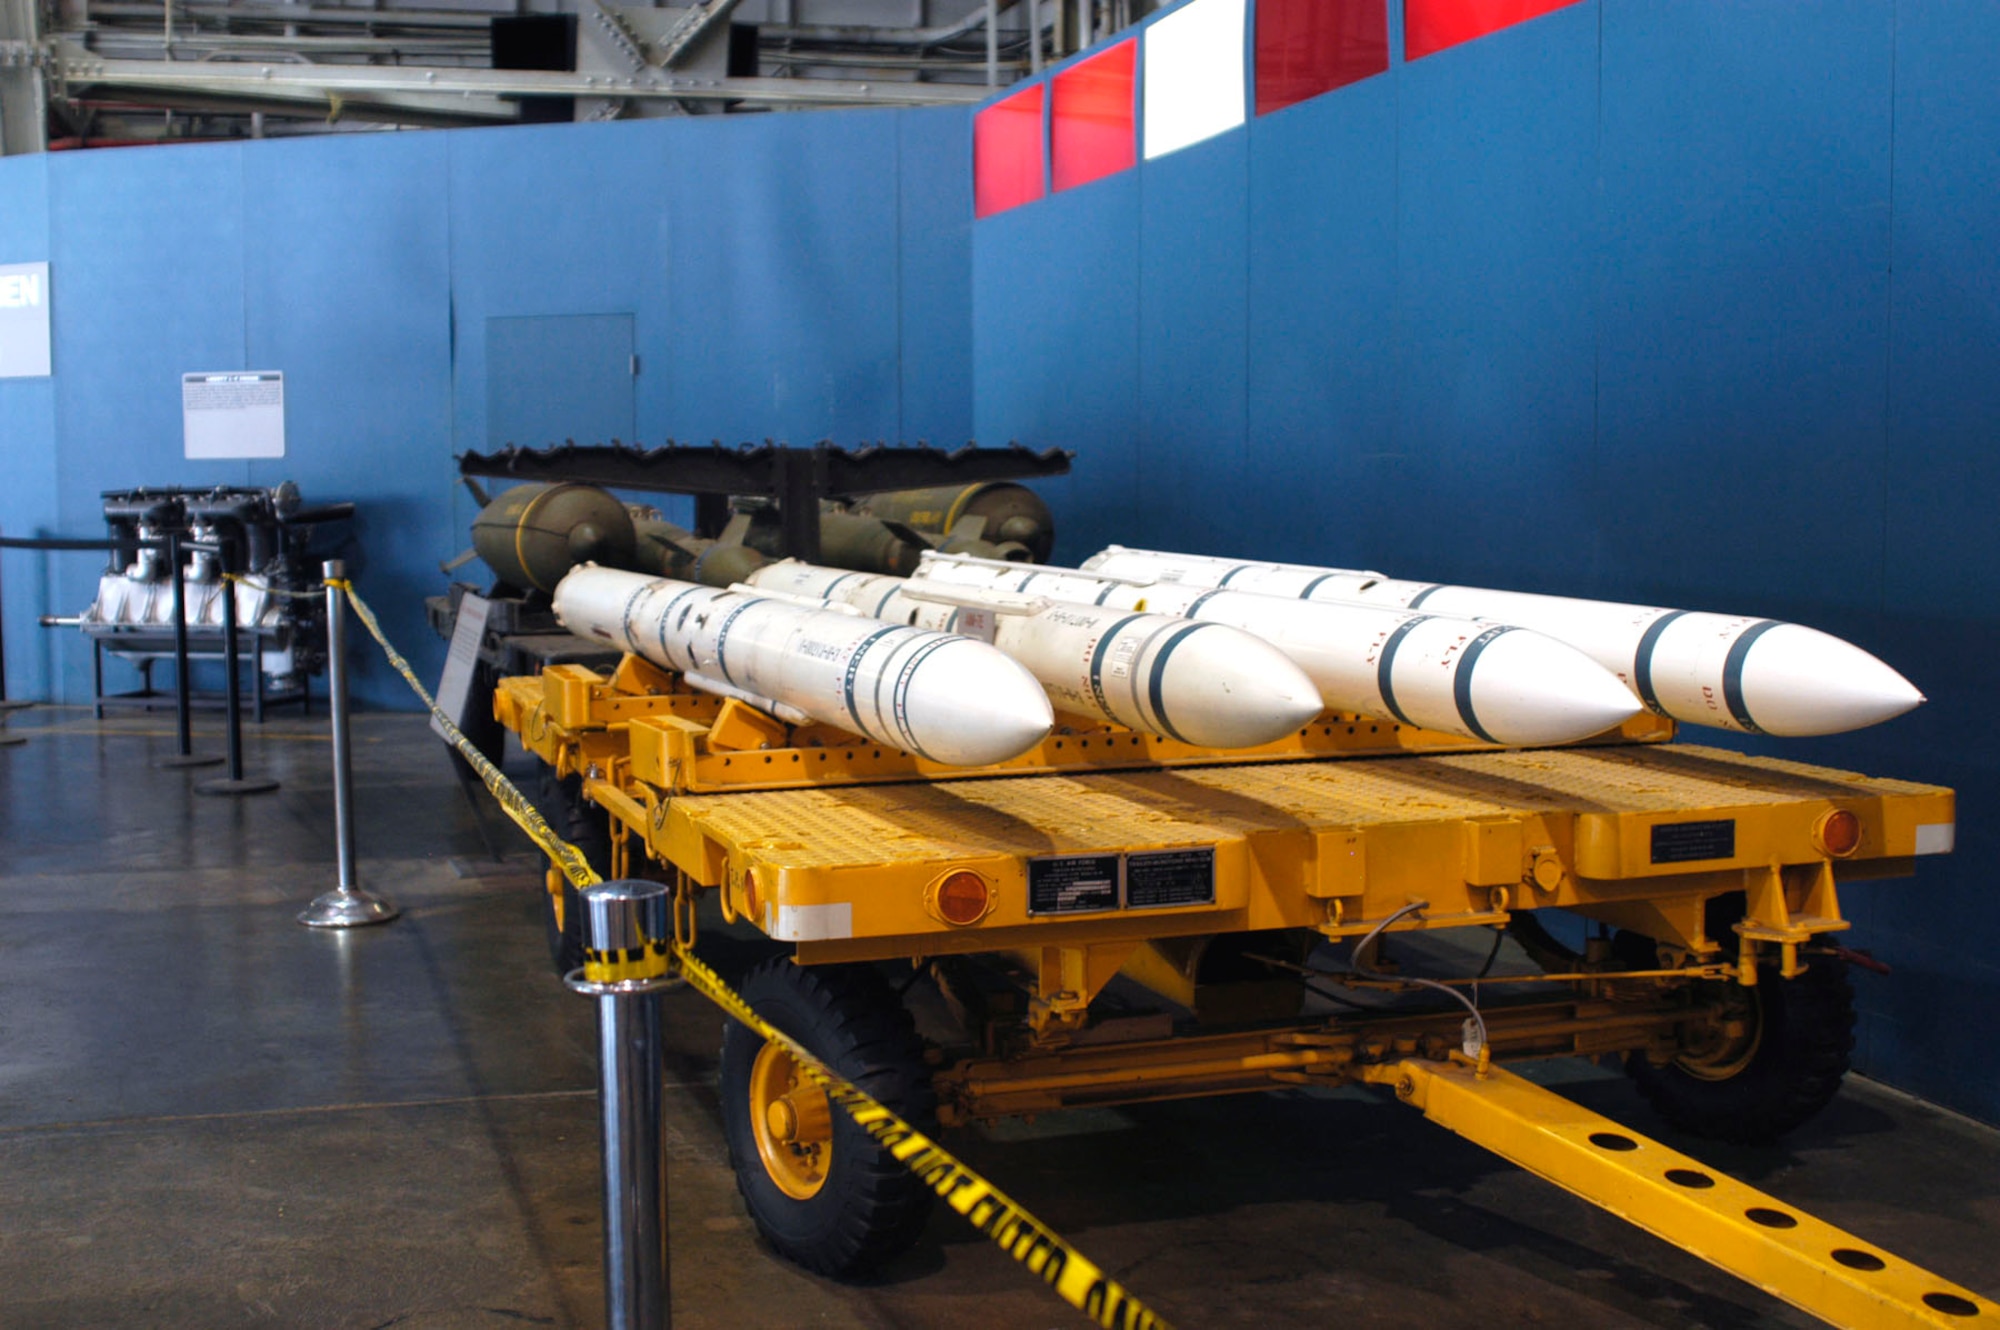 DAYTON, Ohio -- MHU-12 Munitions Handling Trailer on display in the Research & Development Gallery at the National Museum of the United States Air Force. (U.S. Air Force photo)